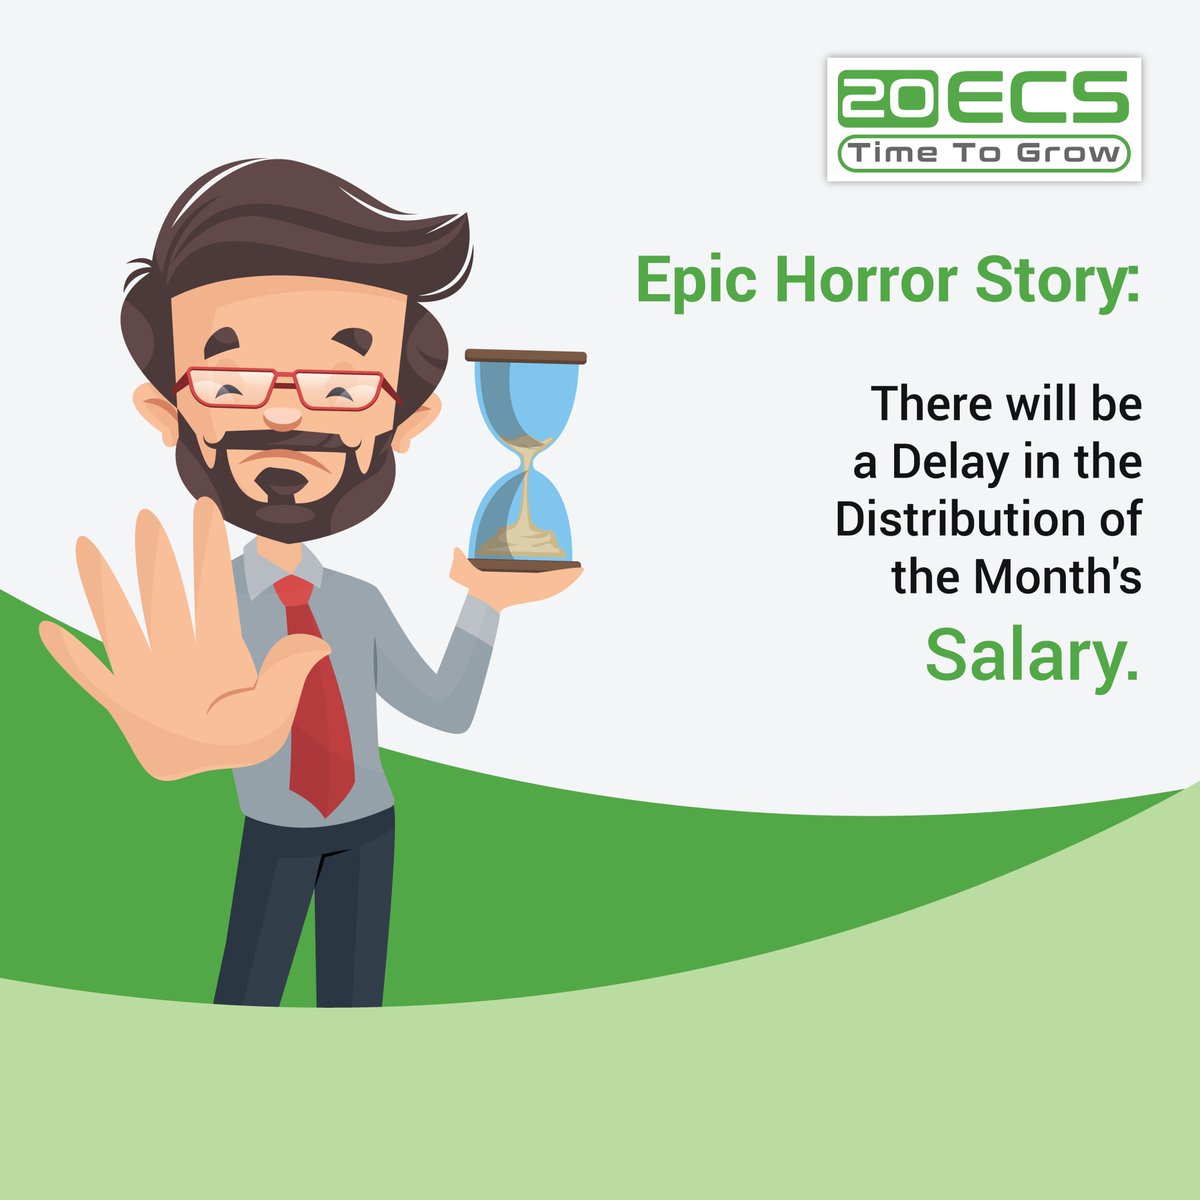 🌱 20ECS: Time To Grow! 🚀 Embrace the epic horror story – a chilling delay in this month's salary distribution. Stay resilient, face the challenge, and let's grow together.

#20ECS #TimeToGrow #SalaryDelay #WorkLifeChallenge #ProfessionalResilience #CareerJourney